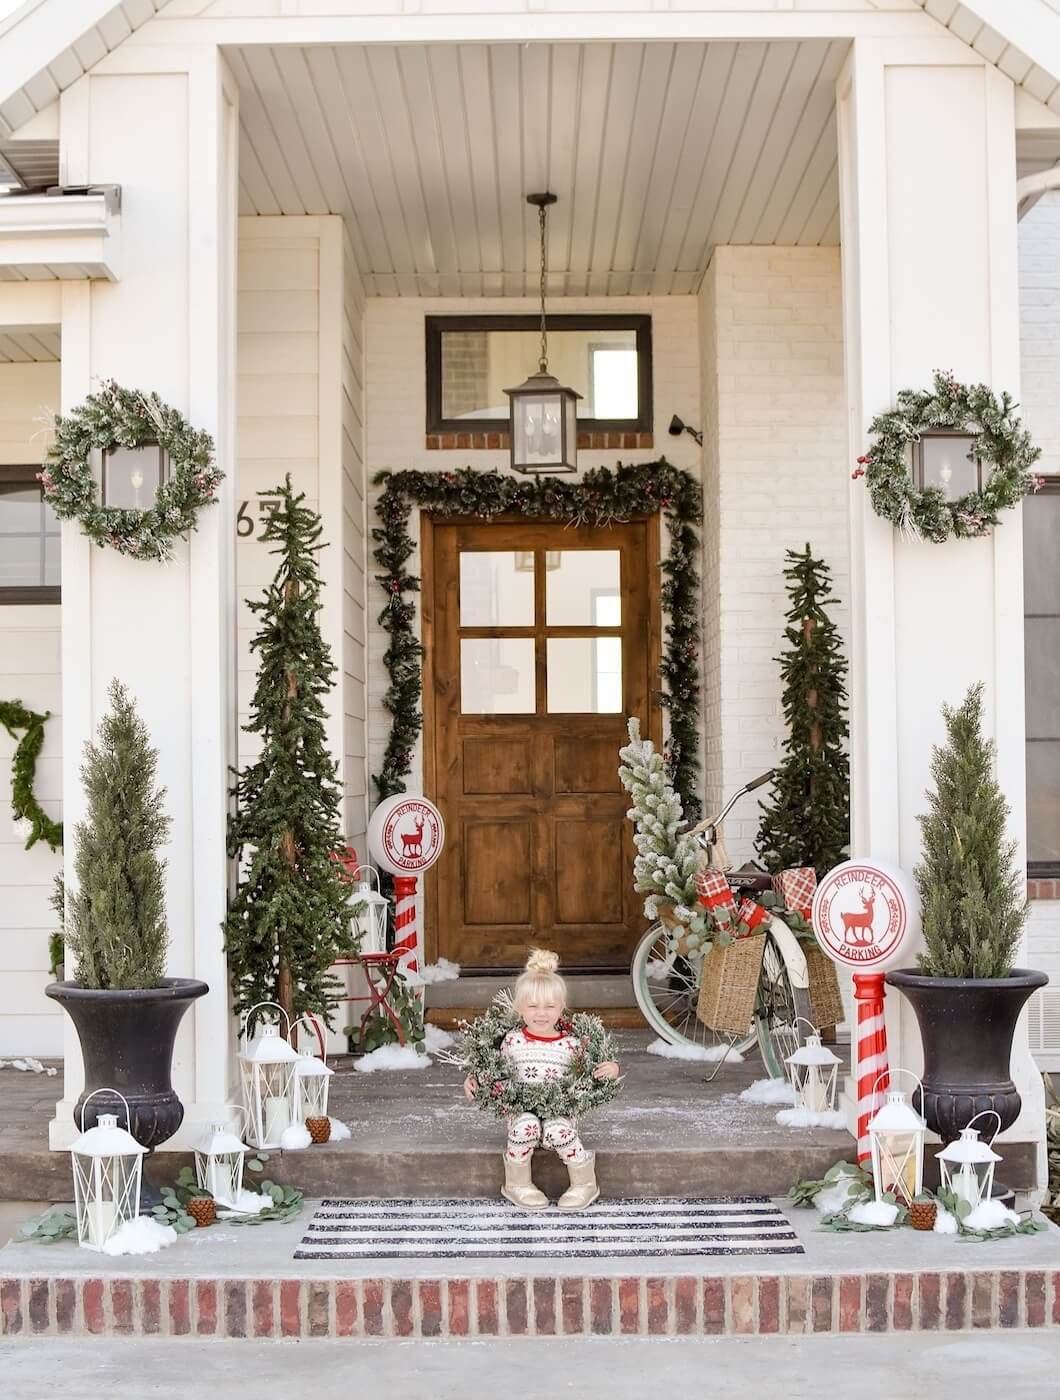 Beautify your front porch with 43 amazing winter decorating ideas - 327